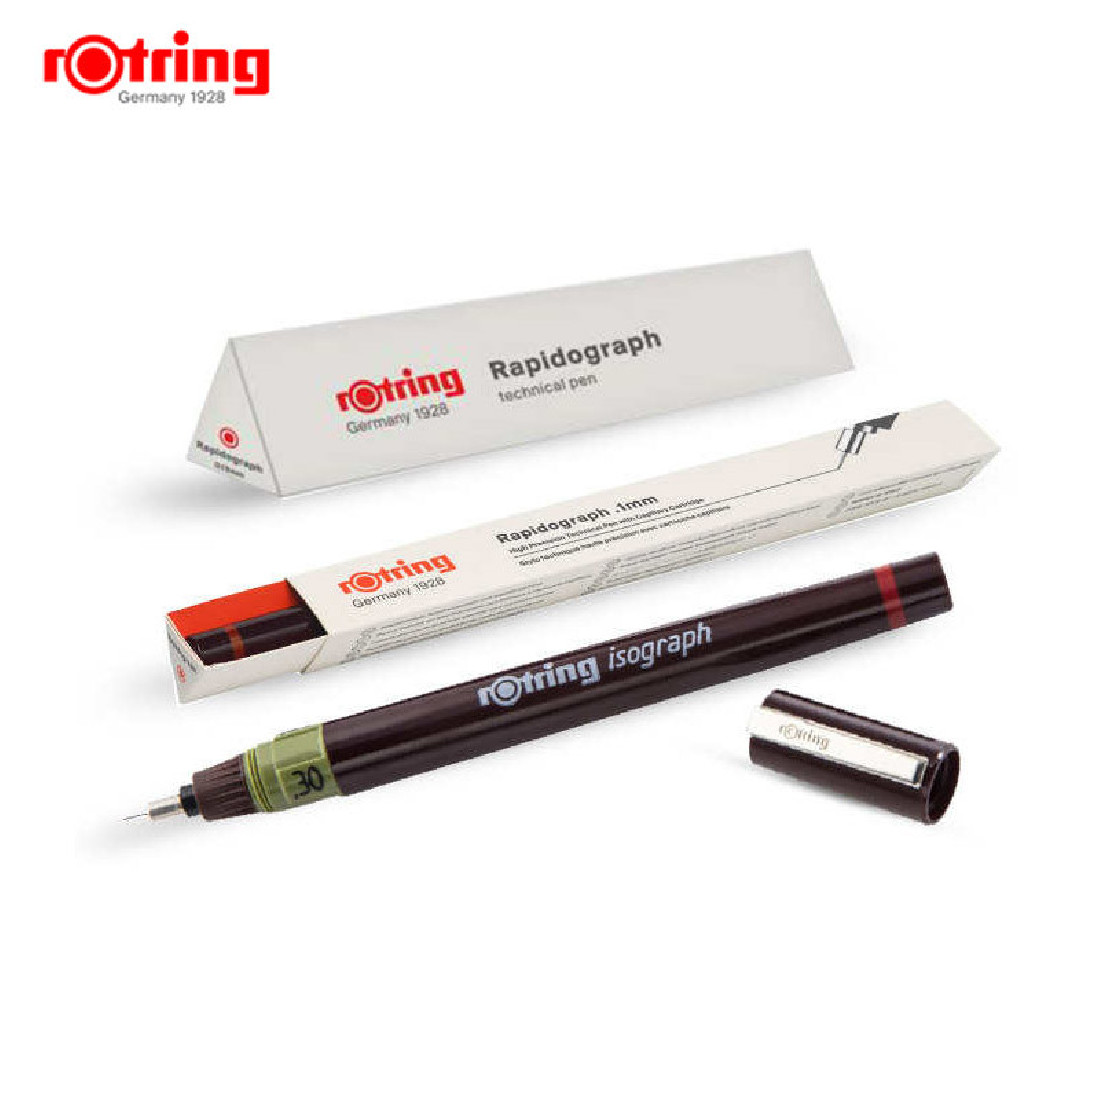 Rotring Isograph pen 0,35mm